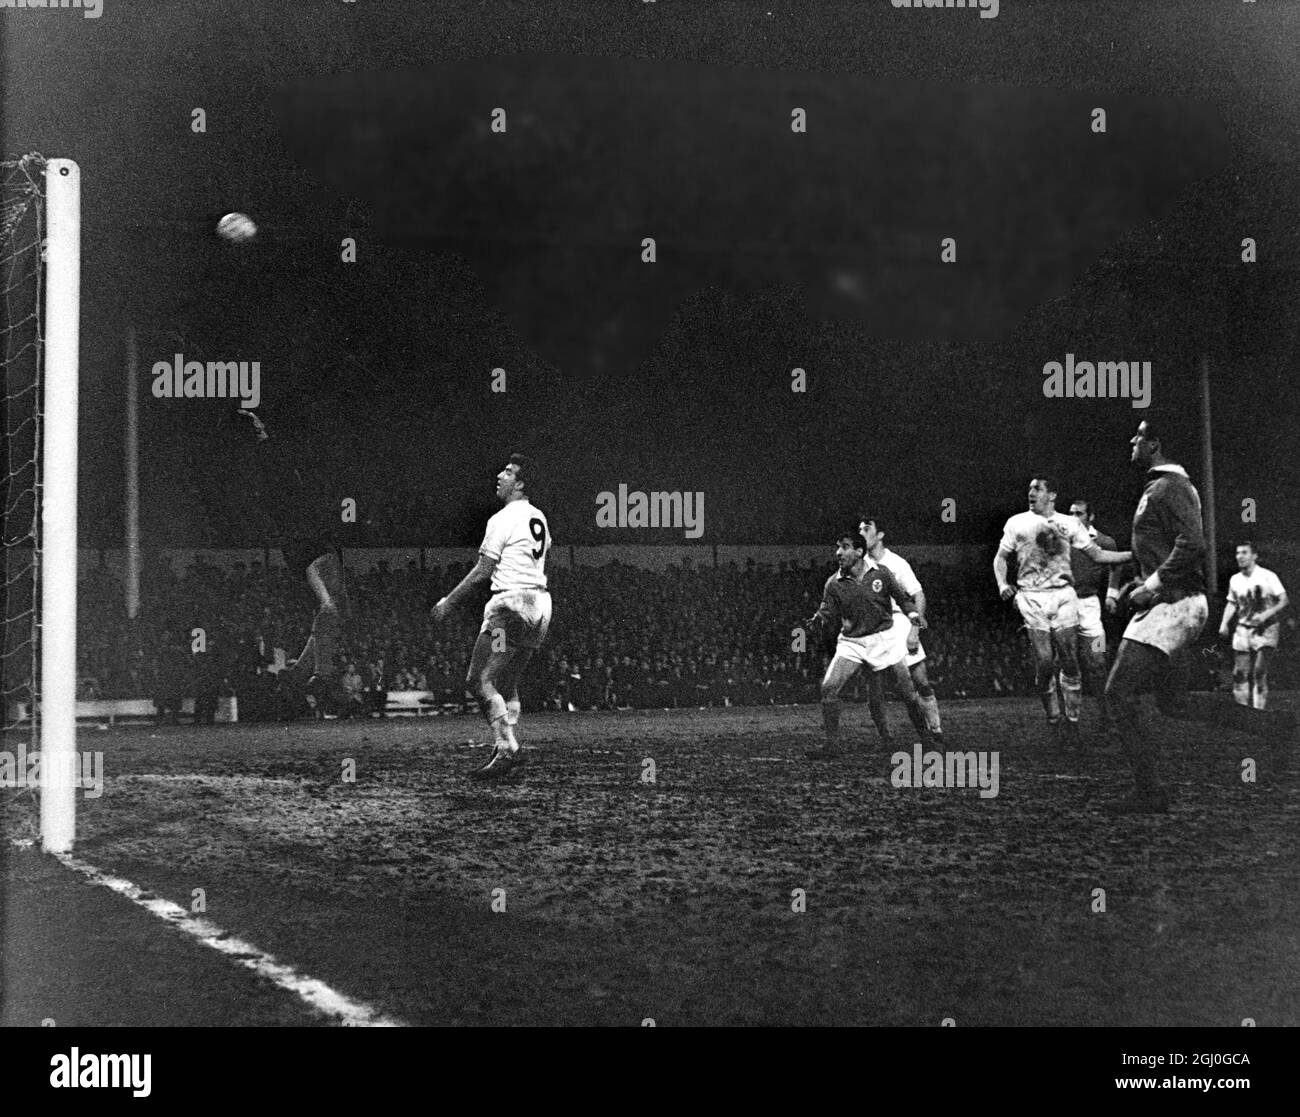 1962 European Cup Semi Final Tottenham Hotspur v Benfica Spurs' left-half Mackay (with arm outstretched on right) sends the ball towards the goal but it rebounds off the crossbar, during the European Cup Semi-final (2nd leg) at White Hart Lane. Standing behind one of the defenders (centre right) is Spurs' inside-left Jimmy Greaves and in front of the goalmouth is centre-forward, Bobby Smith (No.9). 6th April 1962 Stock Photo